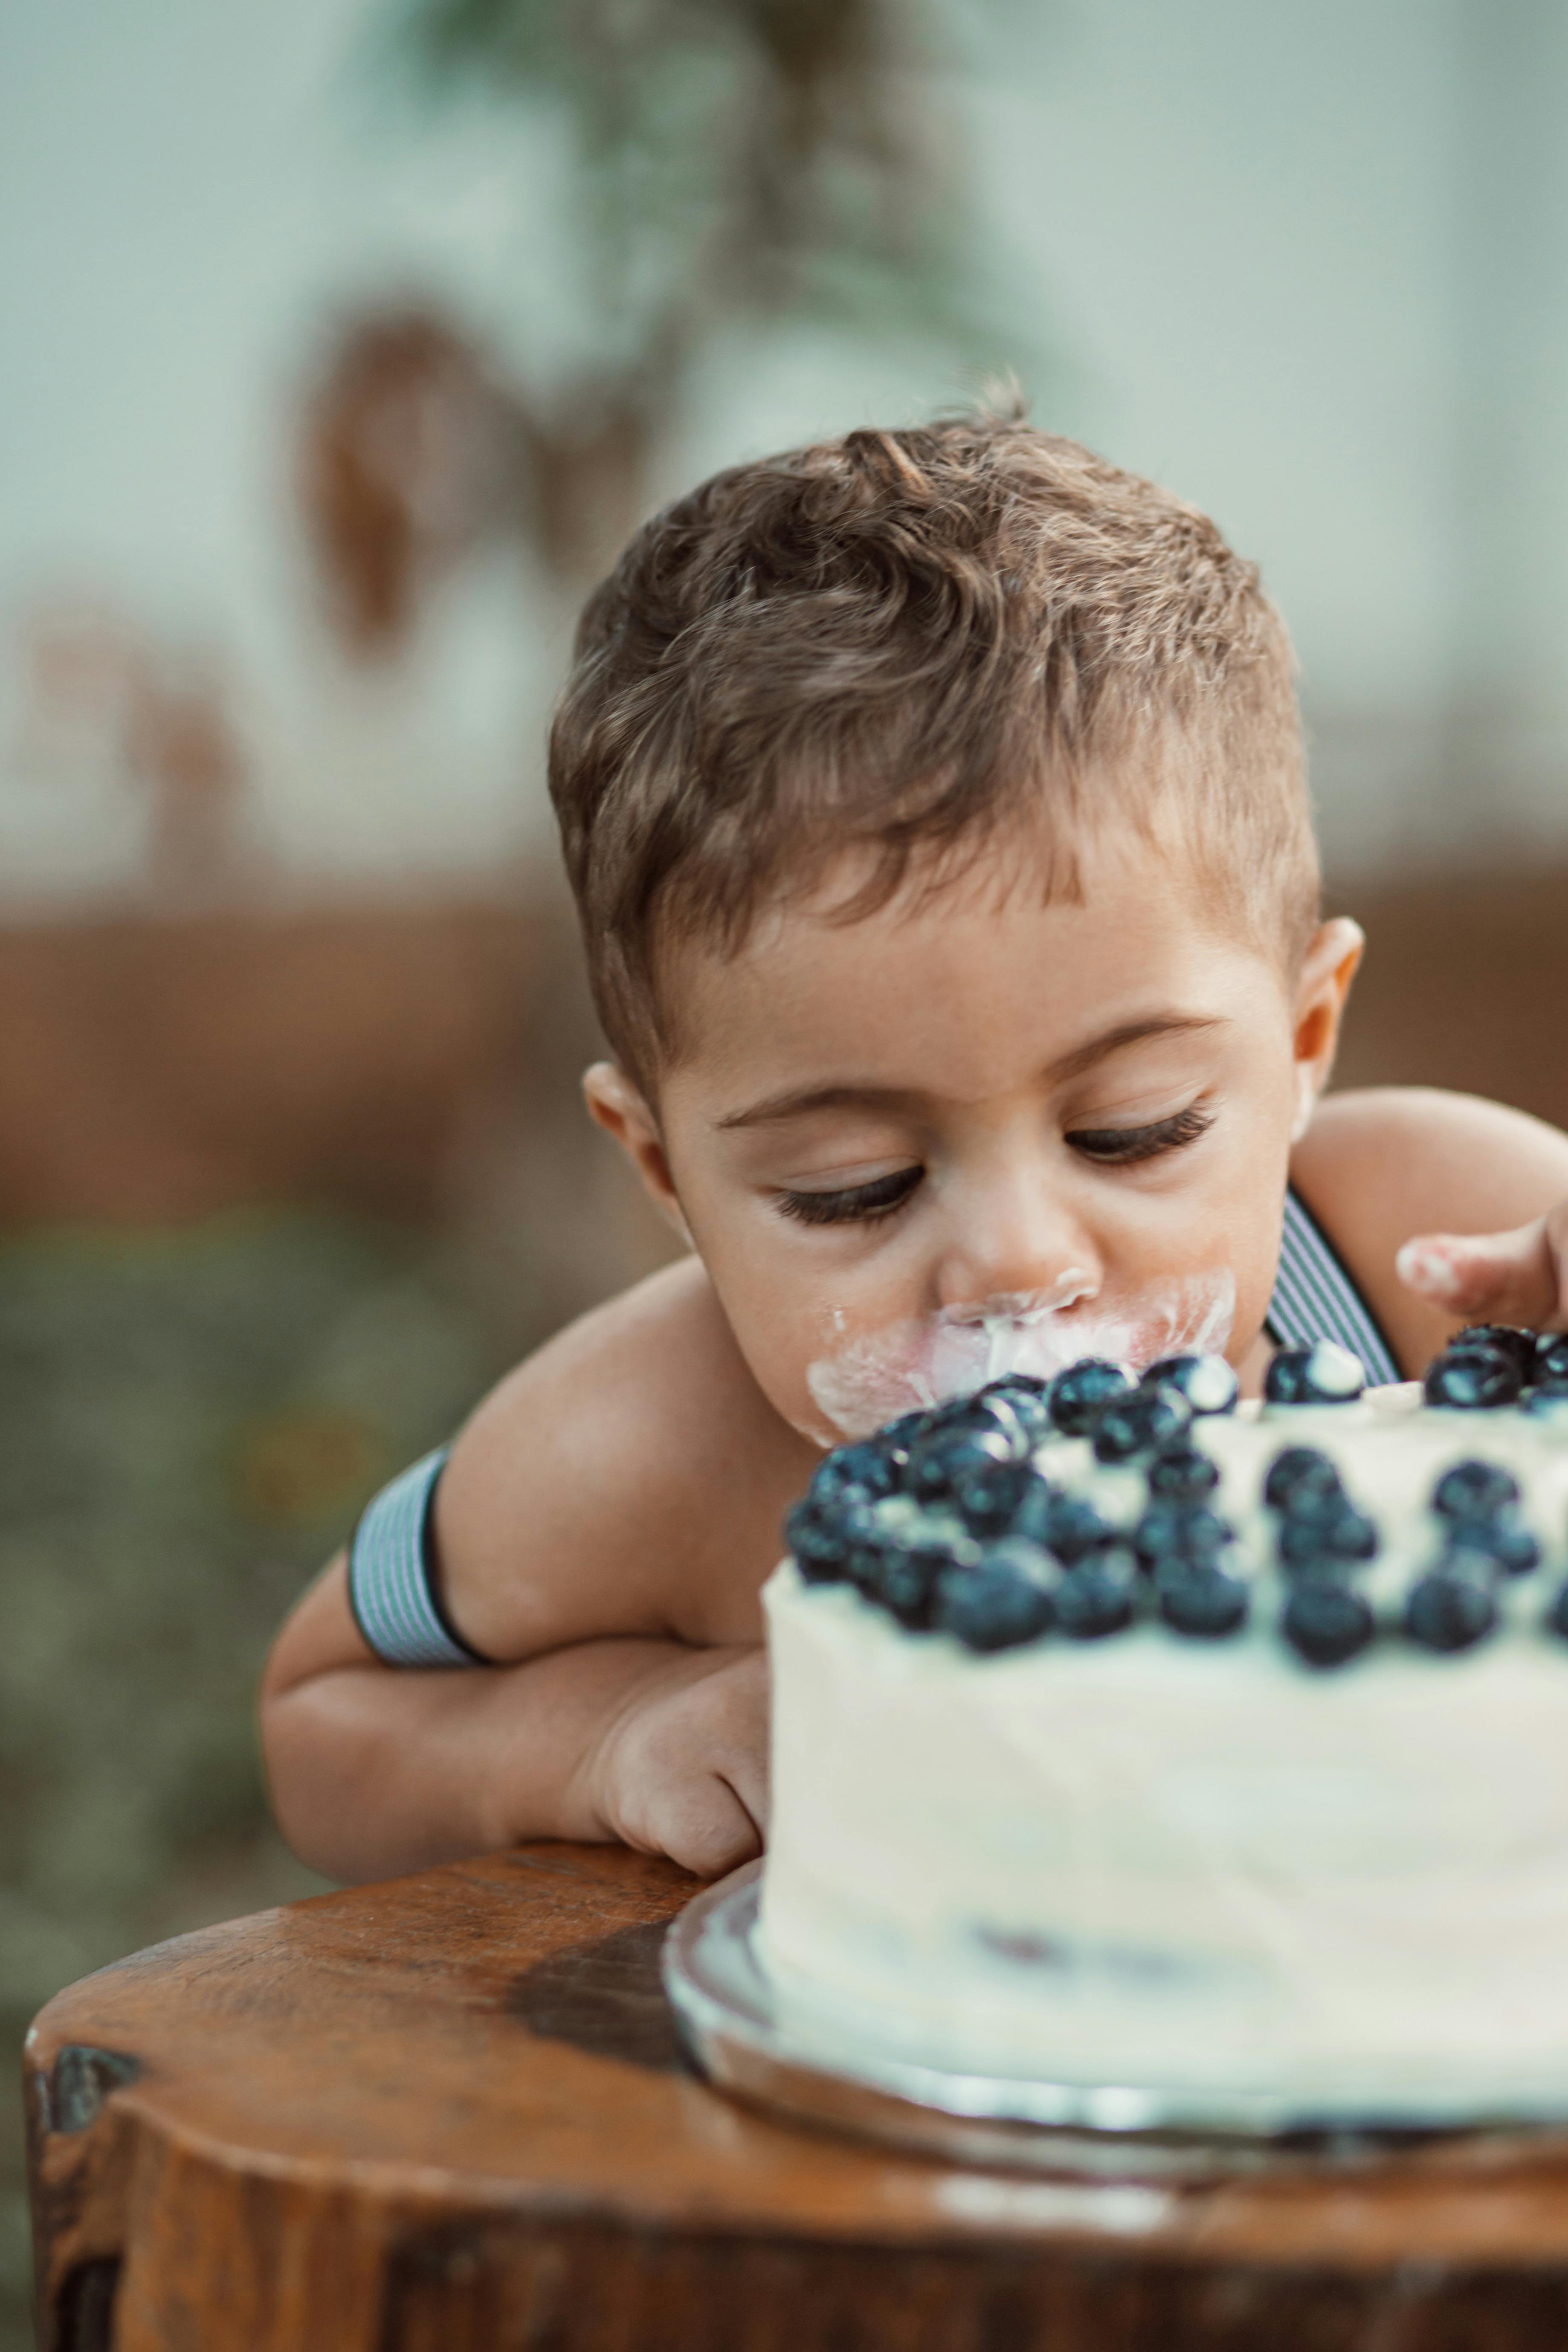 A child biting into a cake | Source: Pexels